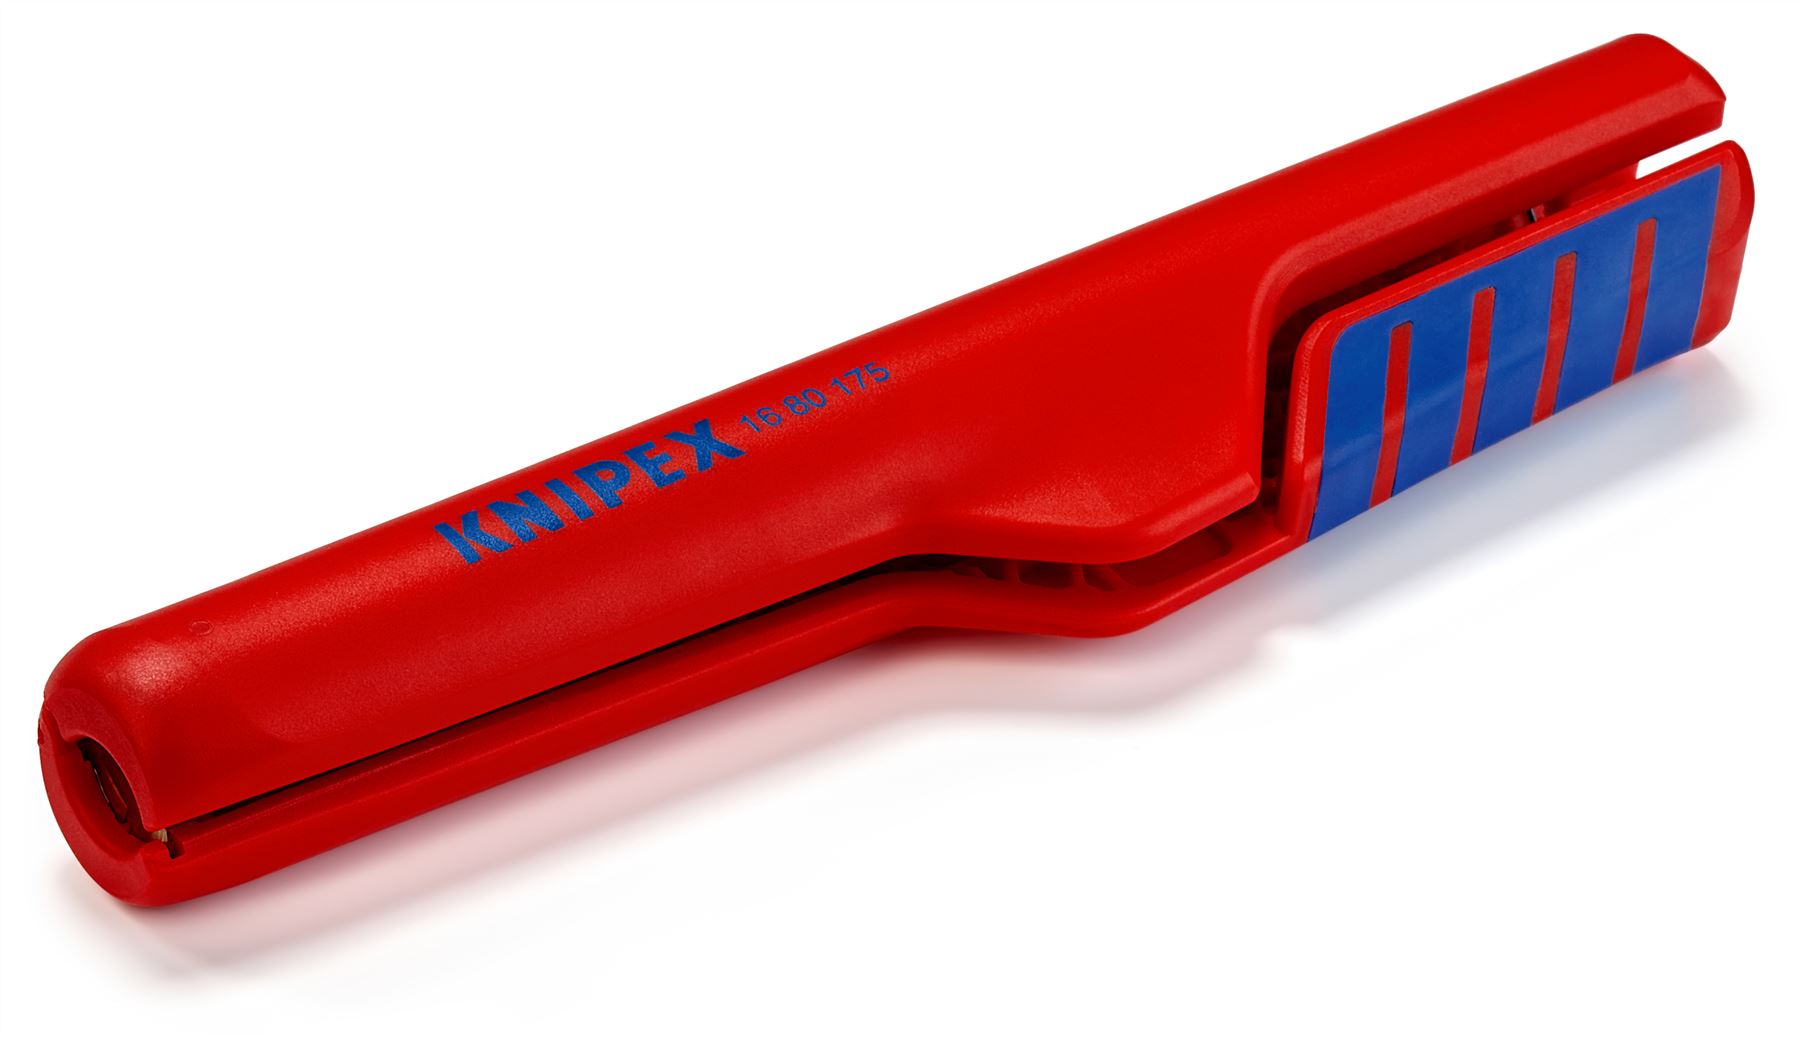 KNIPEX Depth Wire Stripping Tool 175mm for 8-13mm Diameter Cables 16 80 175 SB